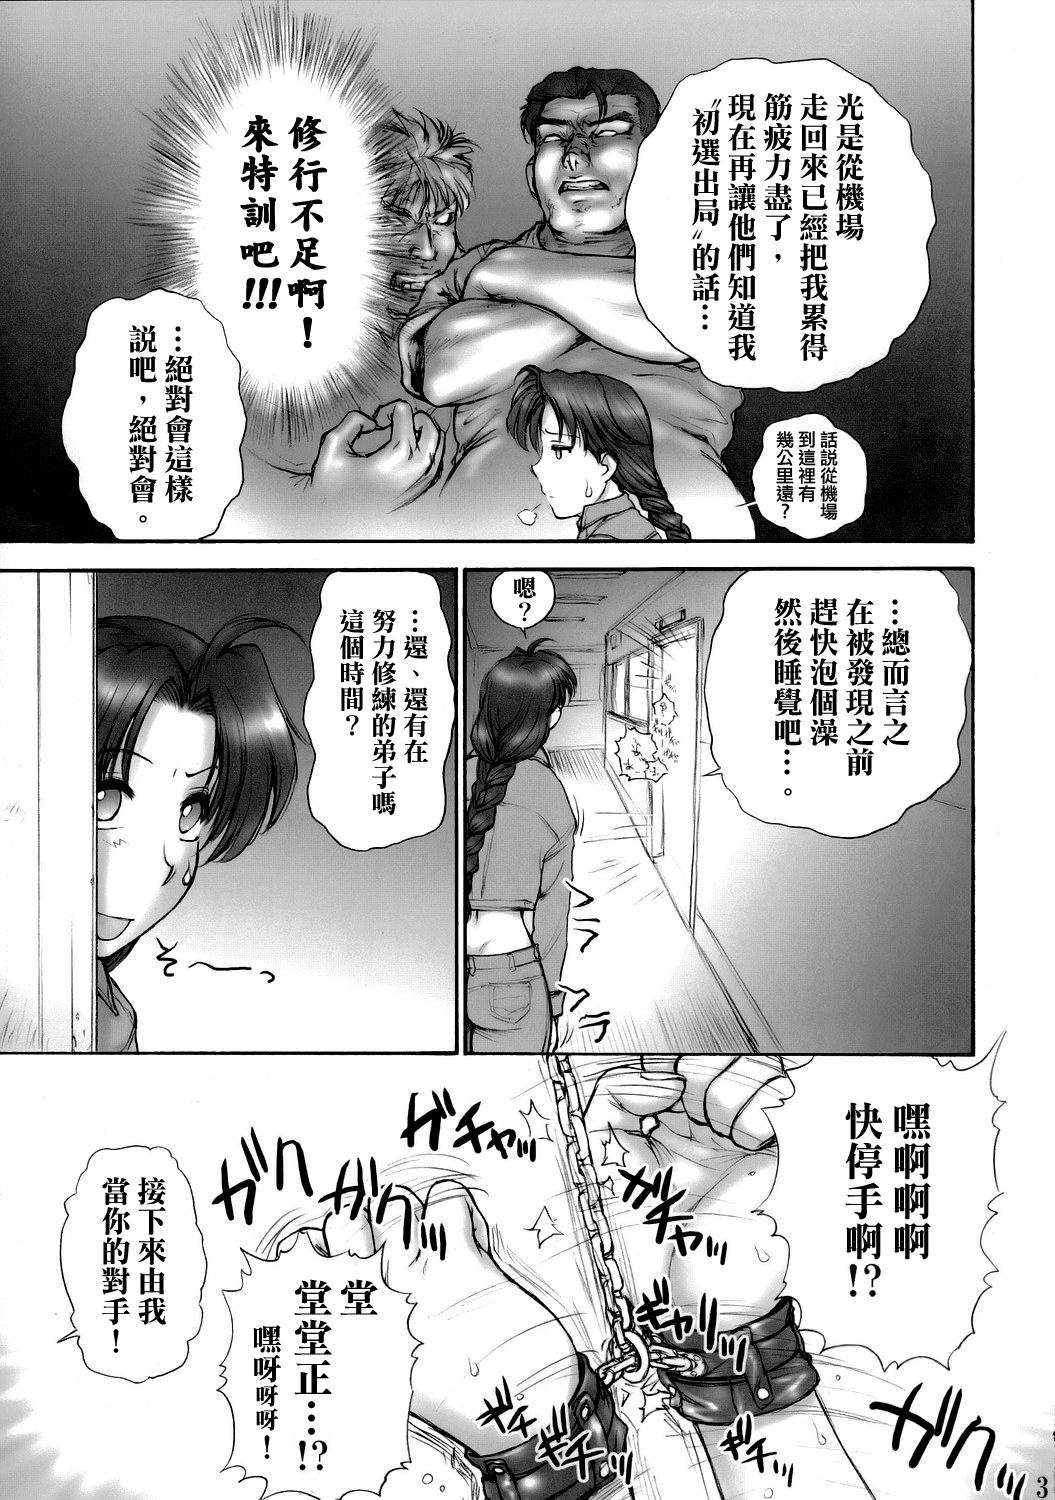 Blondes (SC29) [Shinnihon Pepsitou (St. Germain-sal)] Report Concerning Kyoku-gen-ryuu (The King of Fighters) [Chinese] [日祈漢化] - King of fighters Amatur Porn - Page 5